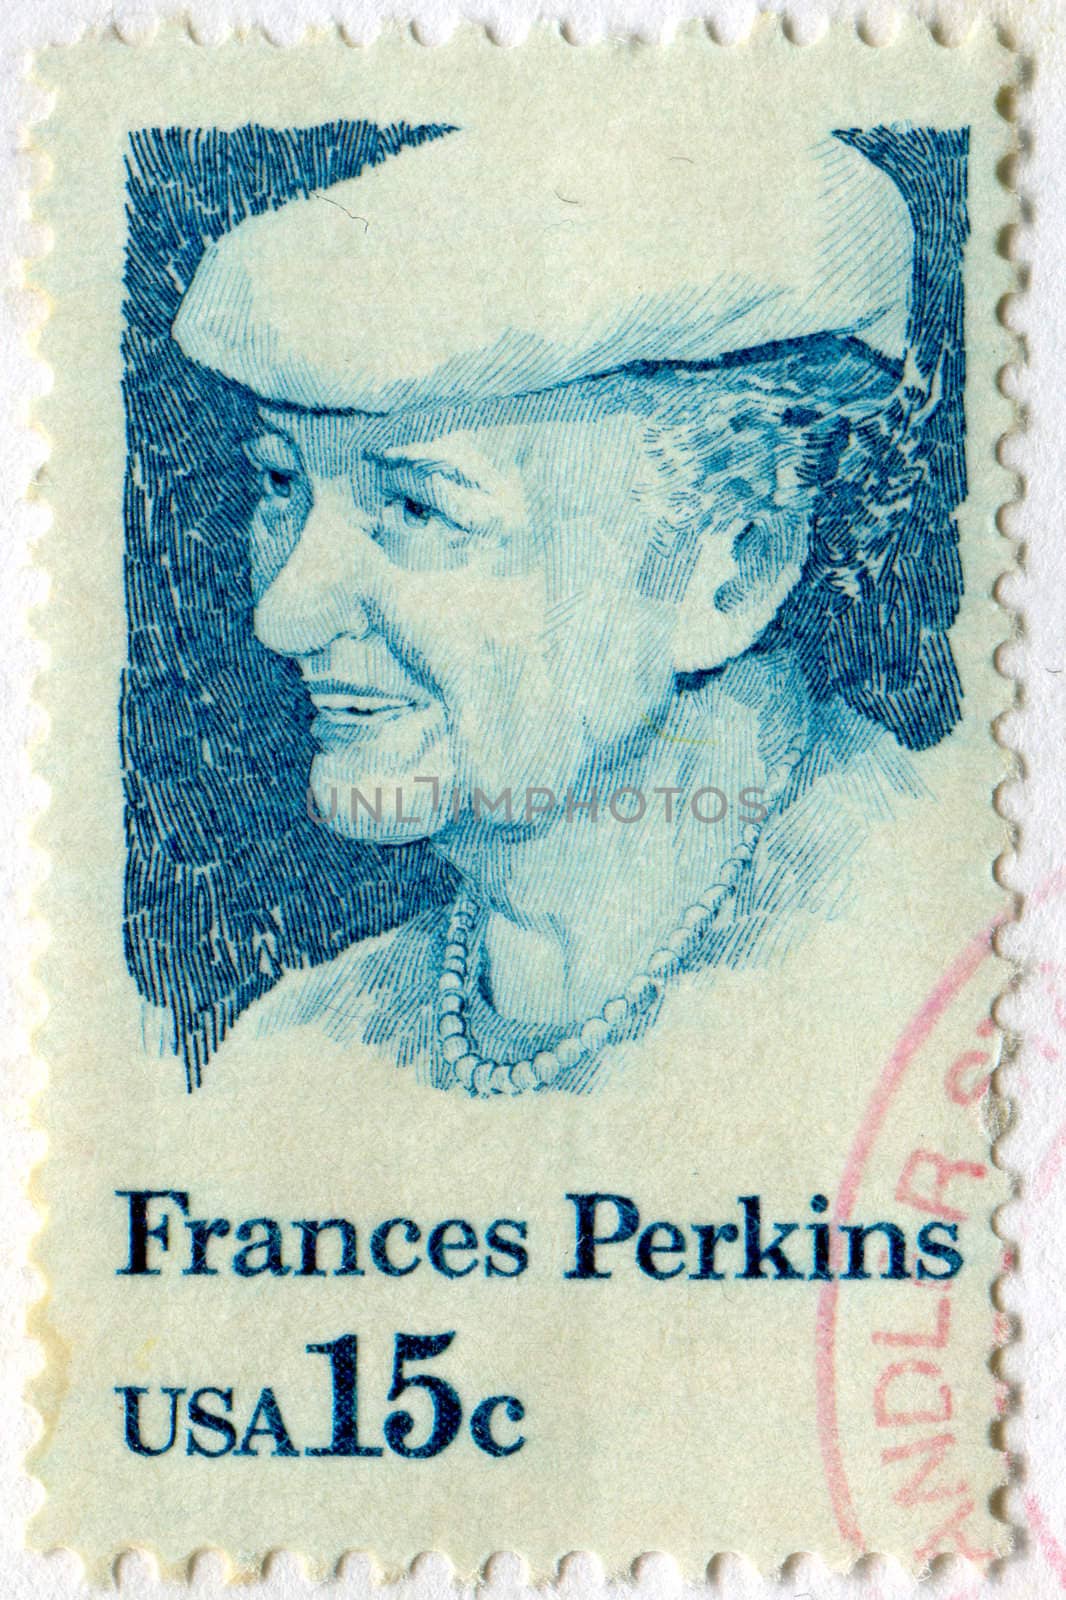 Frances Perkins by rook